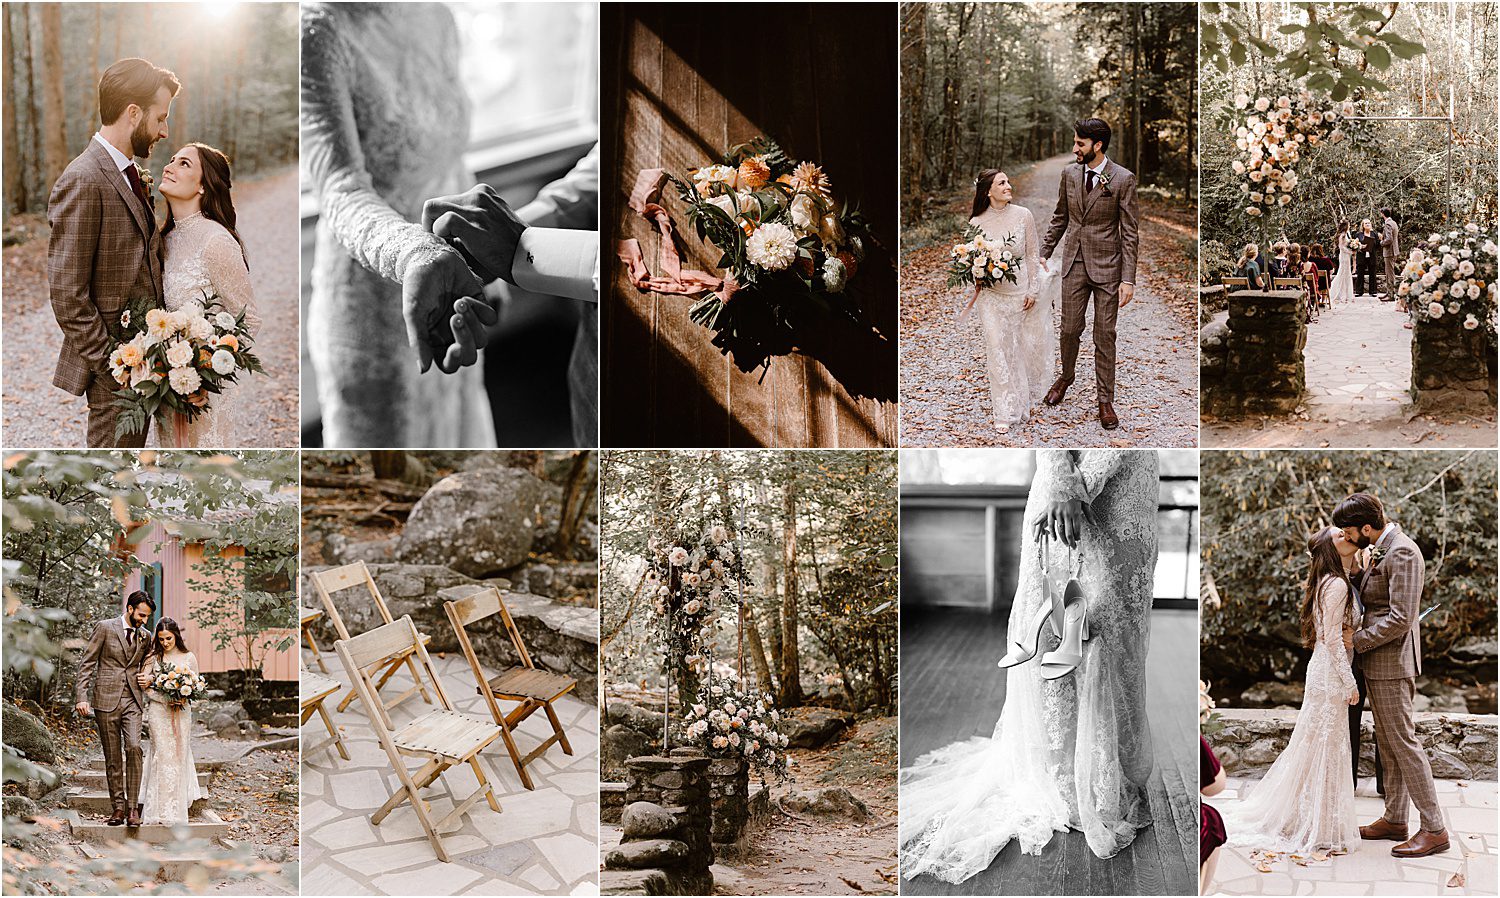 Spence Cabin Elopement in the Smoky Mountains